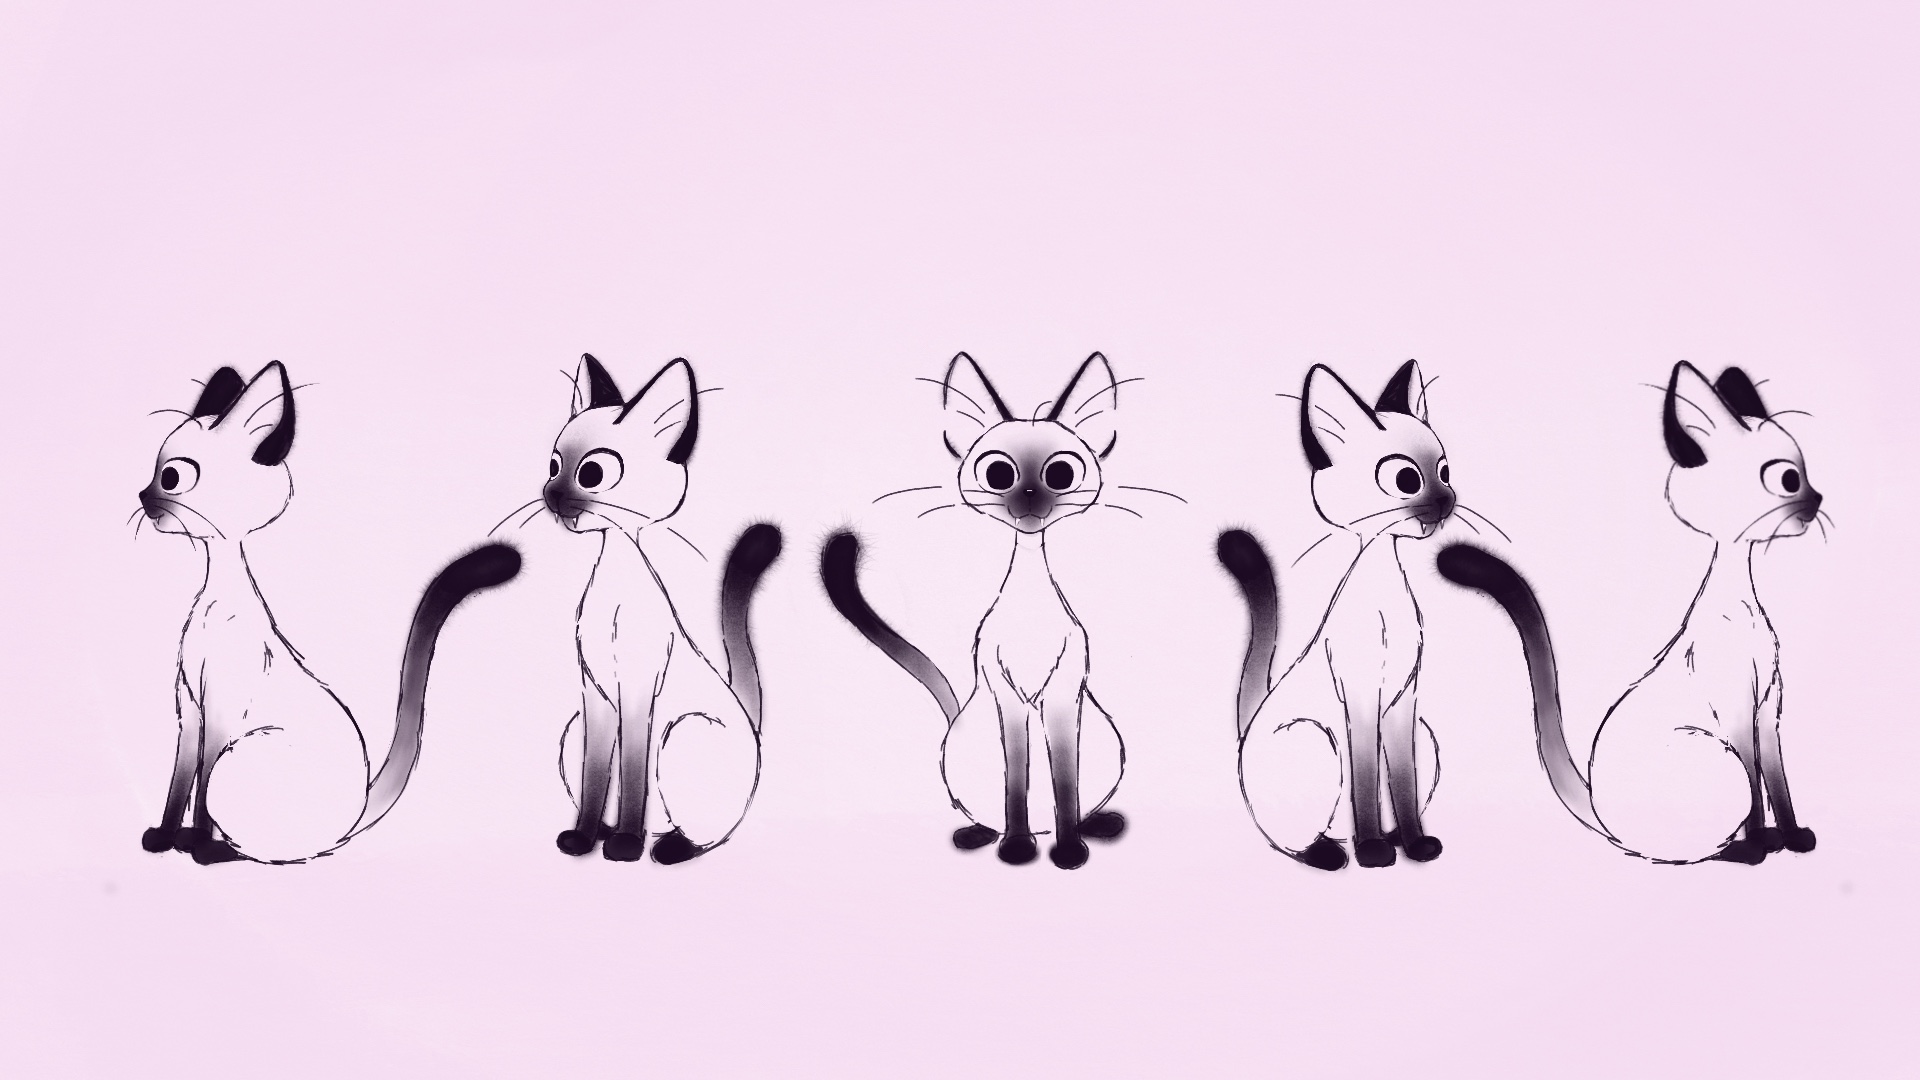 Five illustrations of Siamese cat from different angles